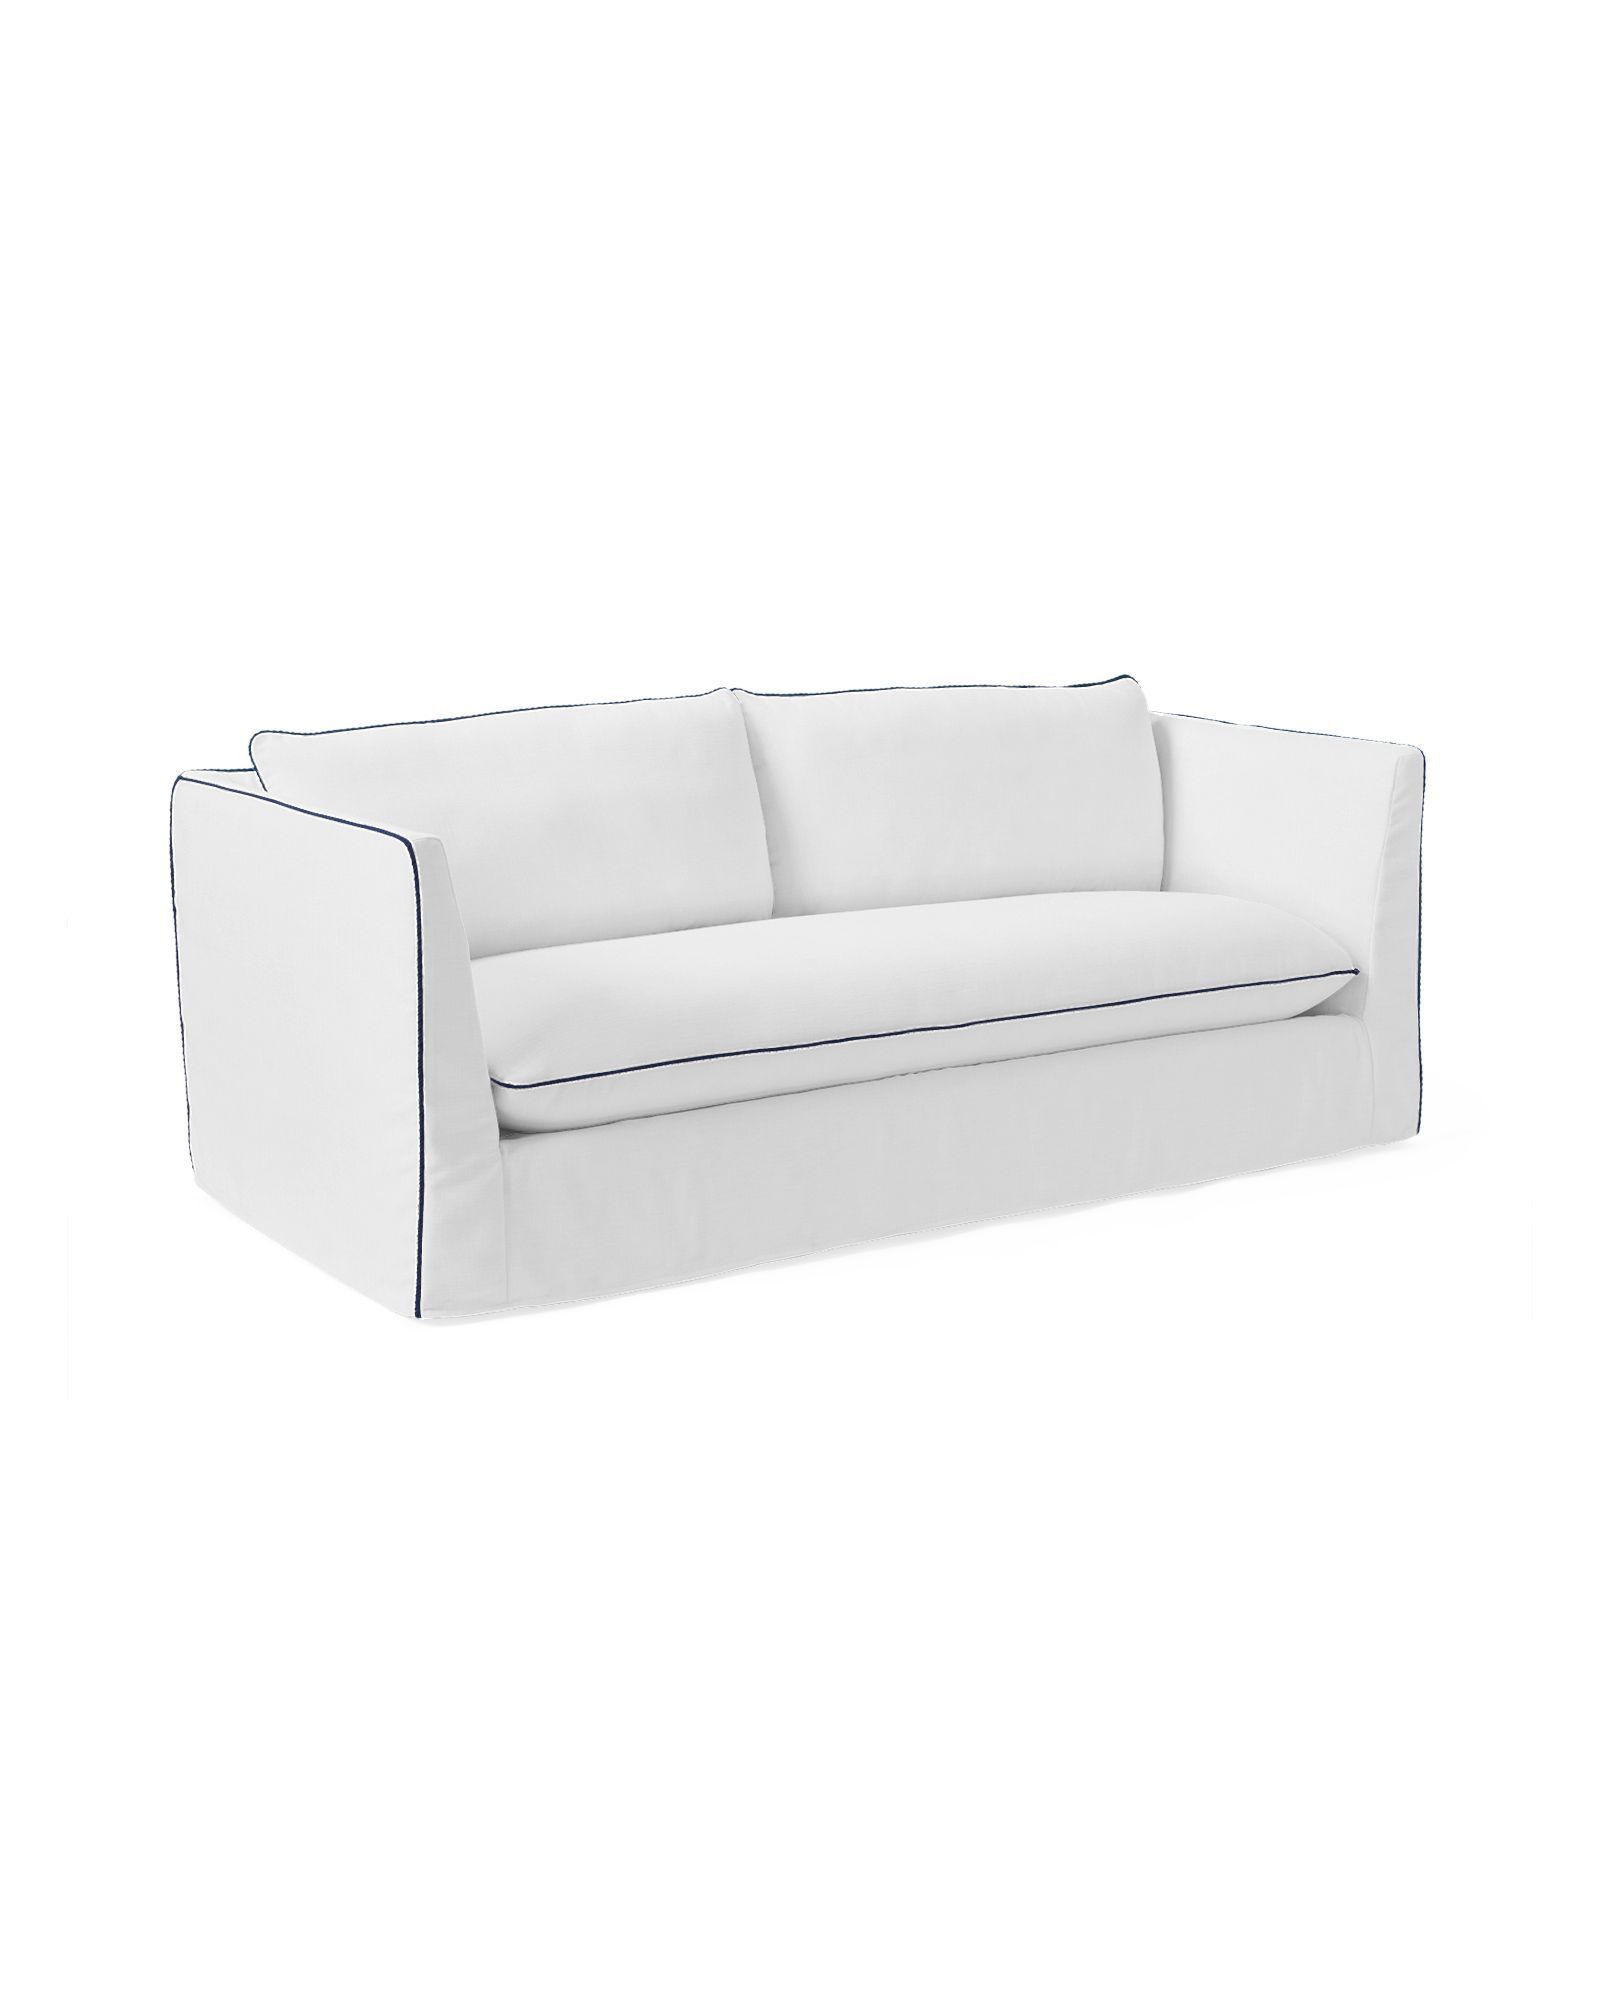 Paros Sofa with Mediterranean Blue Rope Trim | Serena and Lily